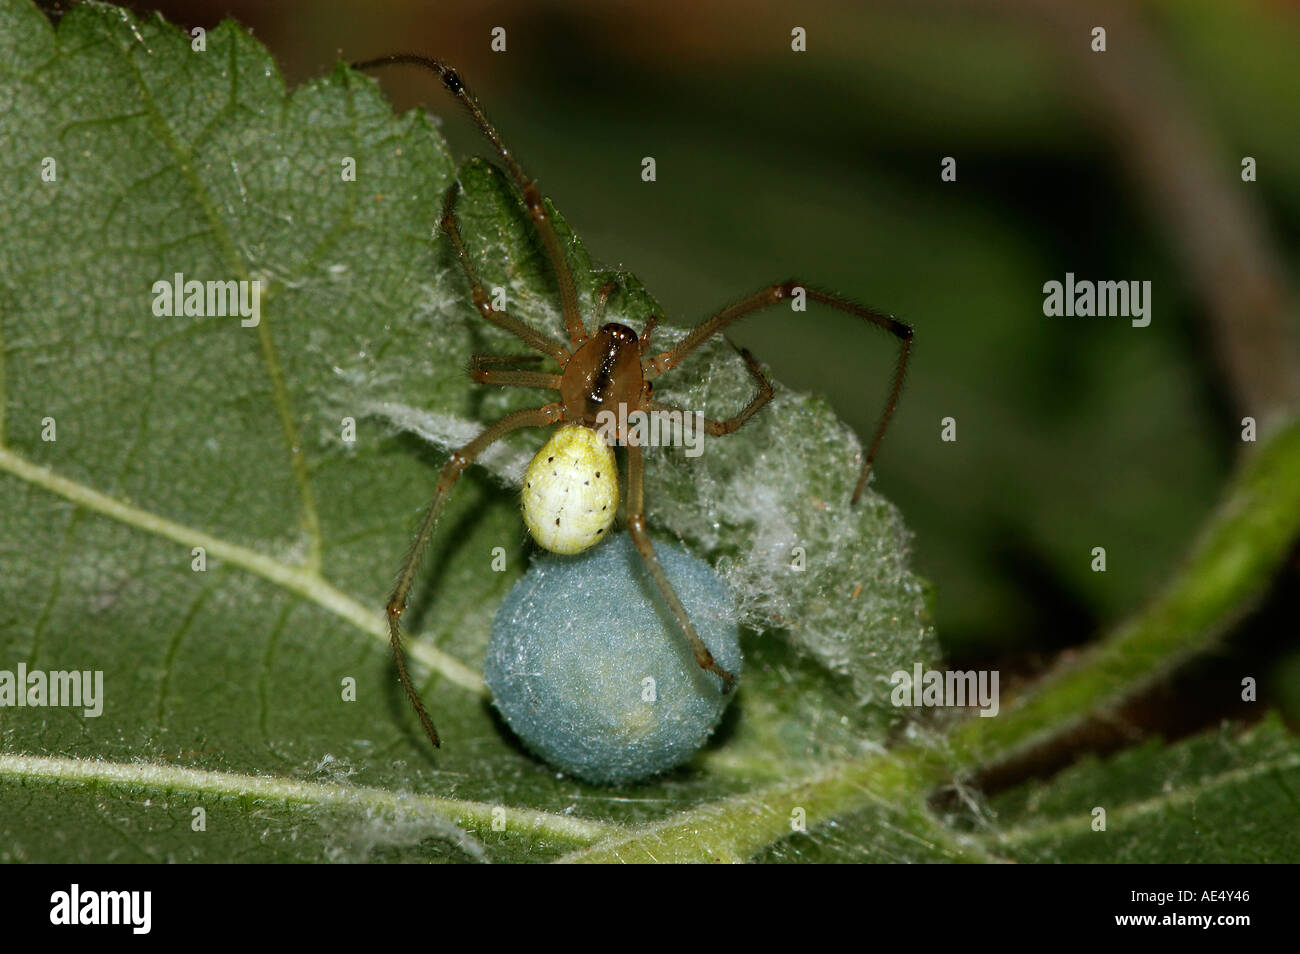 Comb-footed spider with egg cocoon / Enoplognatha ovata Stock Photo